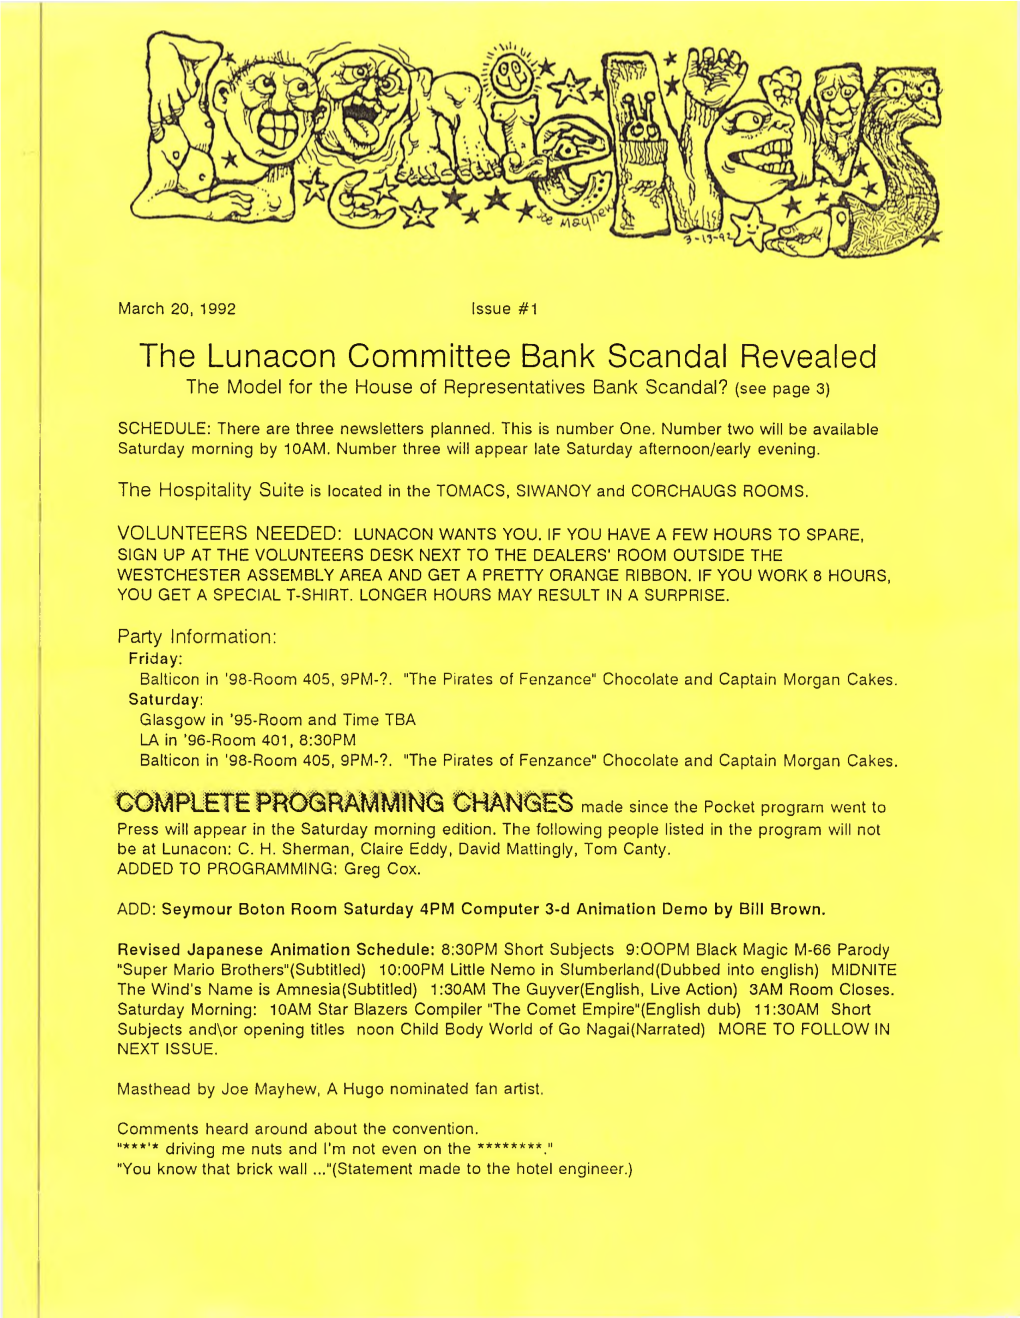 The Lunacon Committee Bank Scandal Revealed the Model for the House of Representatives Bank Scandal? (See Page 3)